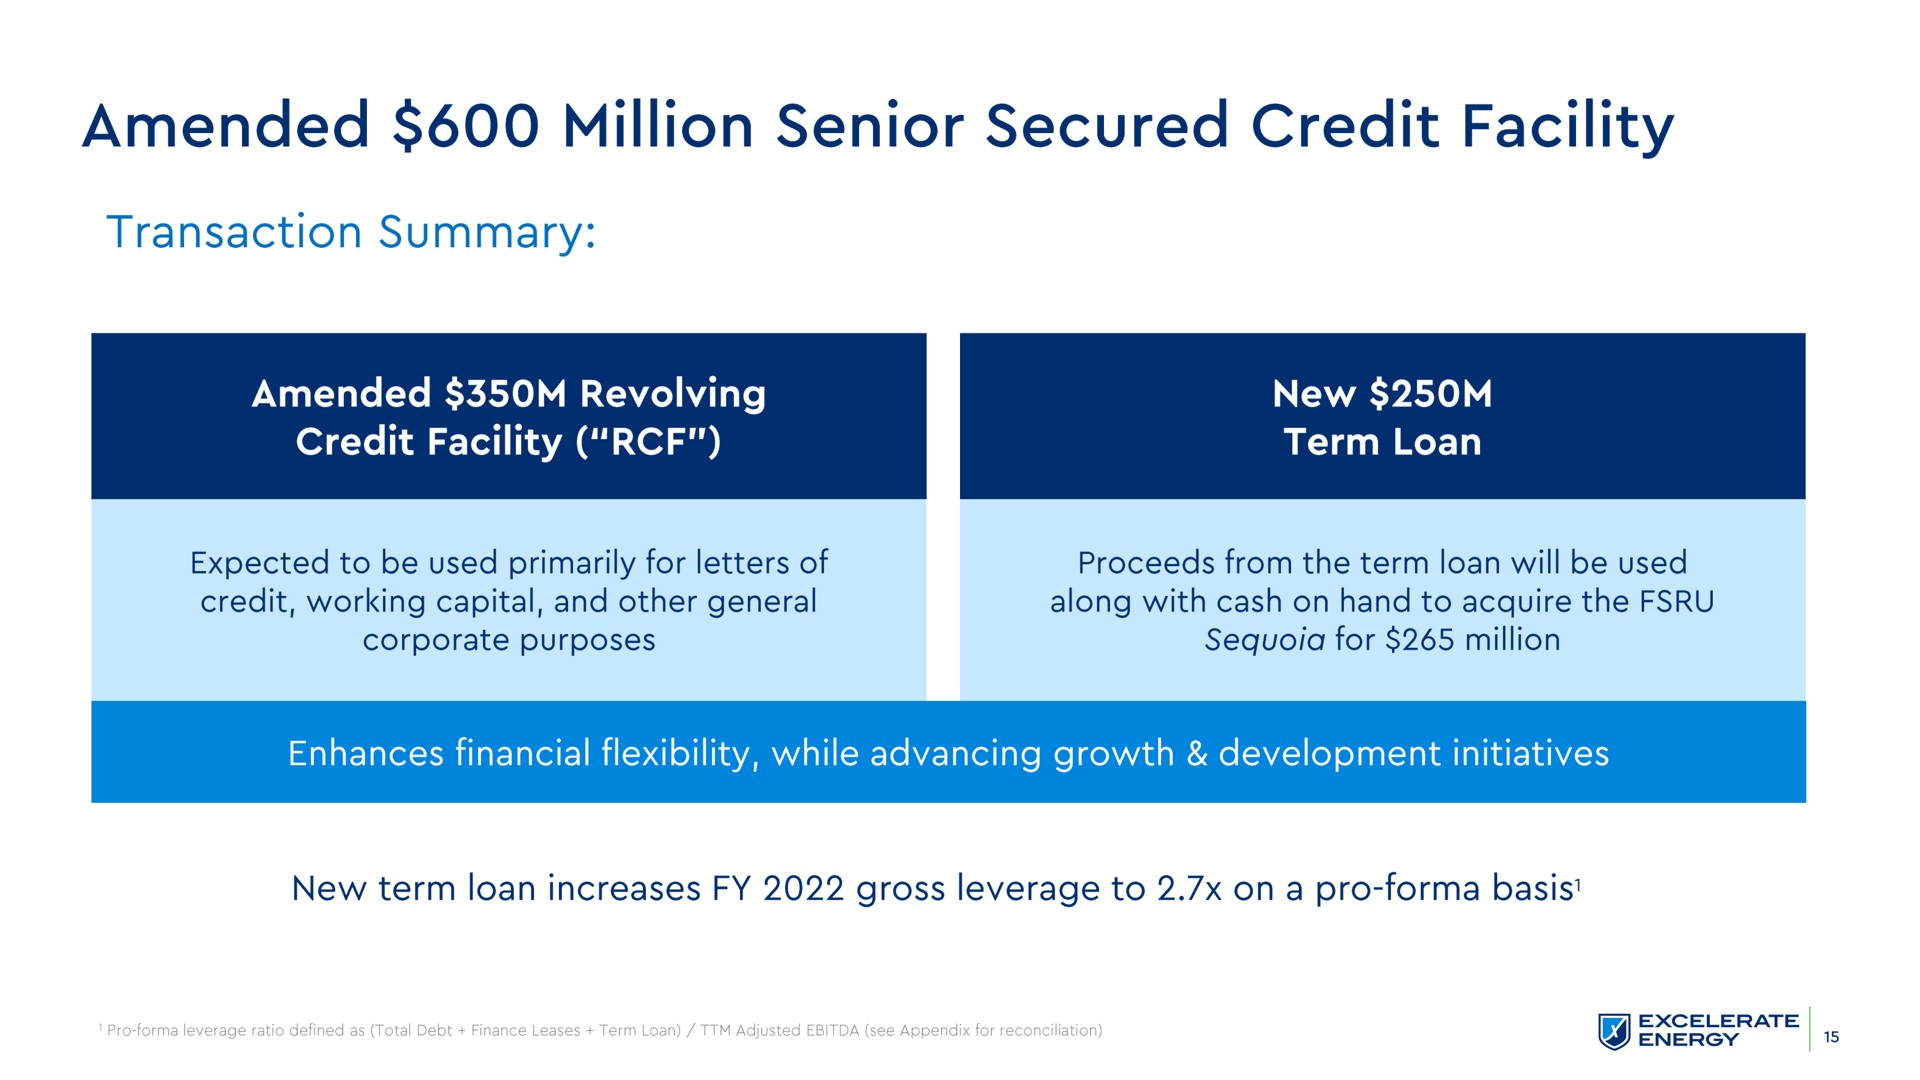 amended million senior secured credit facility | Excelerate Energy